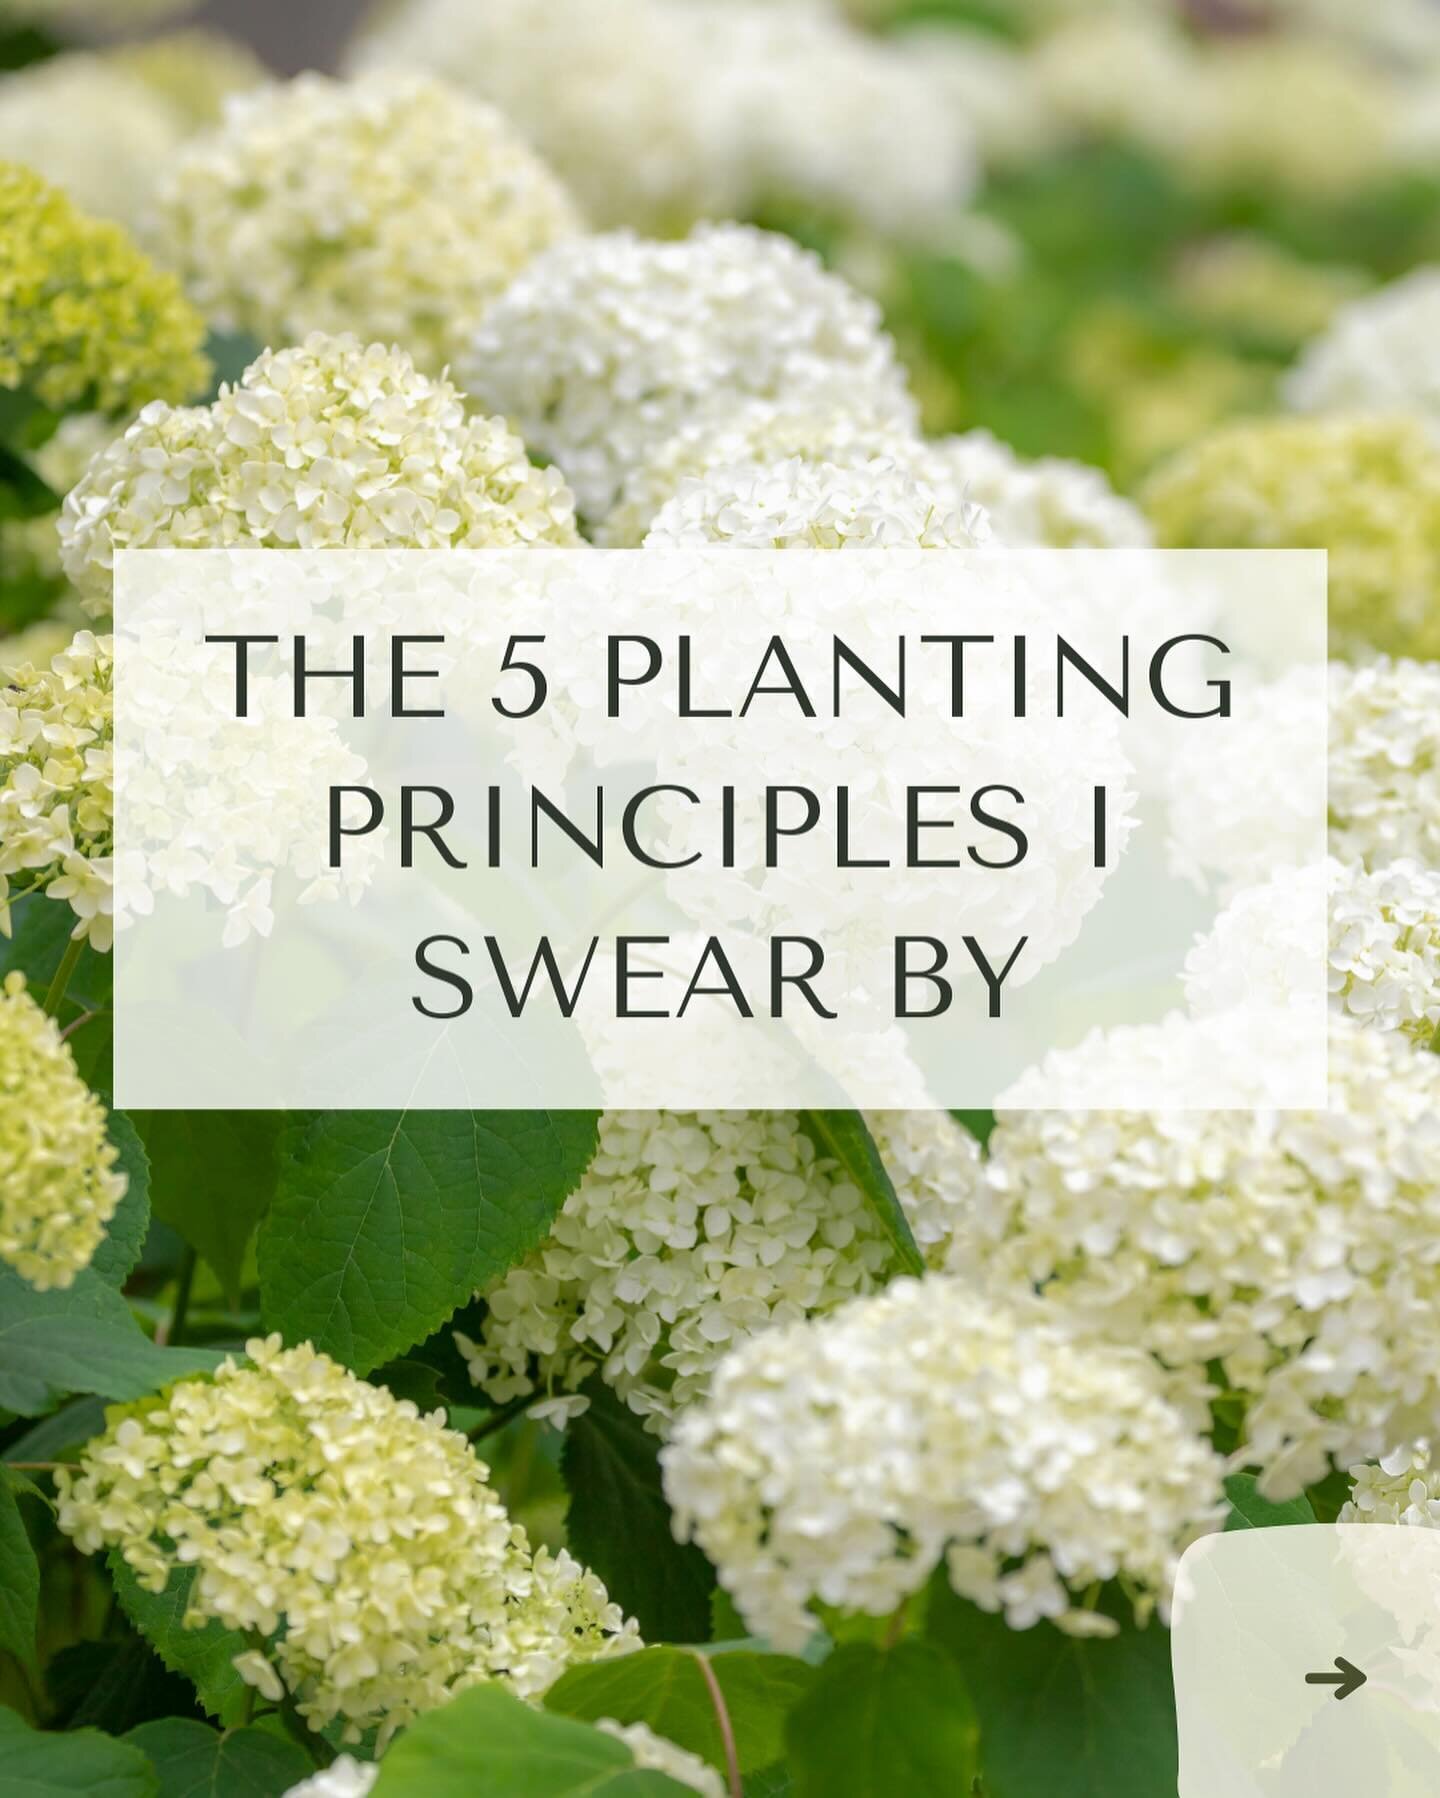 Hurrah! We&rsquo;re right into prime planting season now which makes my heart sing 😀

But before you jump in it&rsquo;s so worth taking a bit of time to plan your plant choices and your planting combos. And here are 5 principles I swear by to get yo